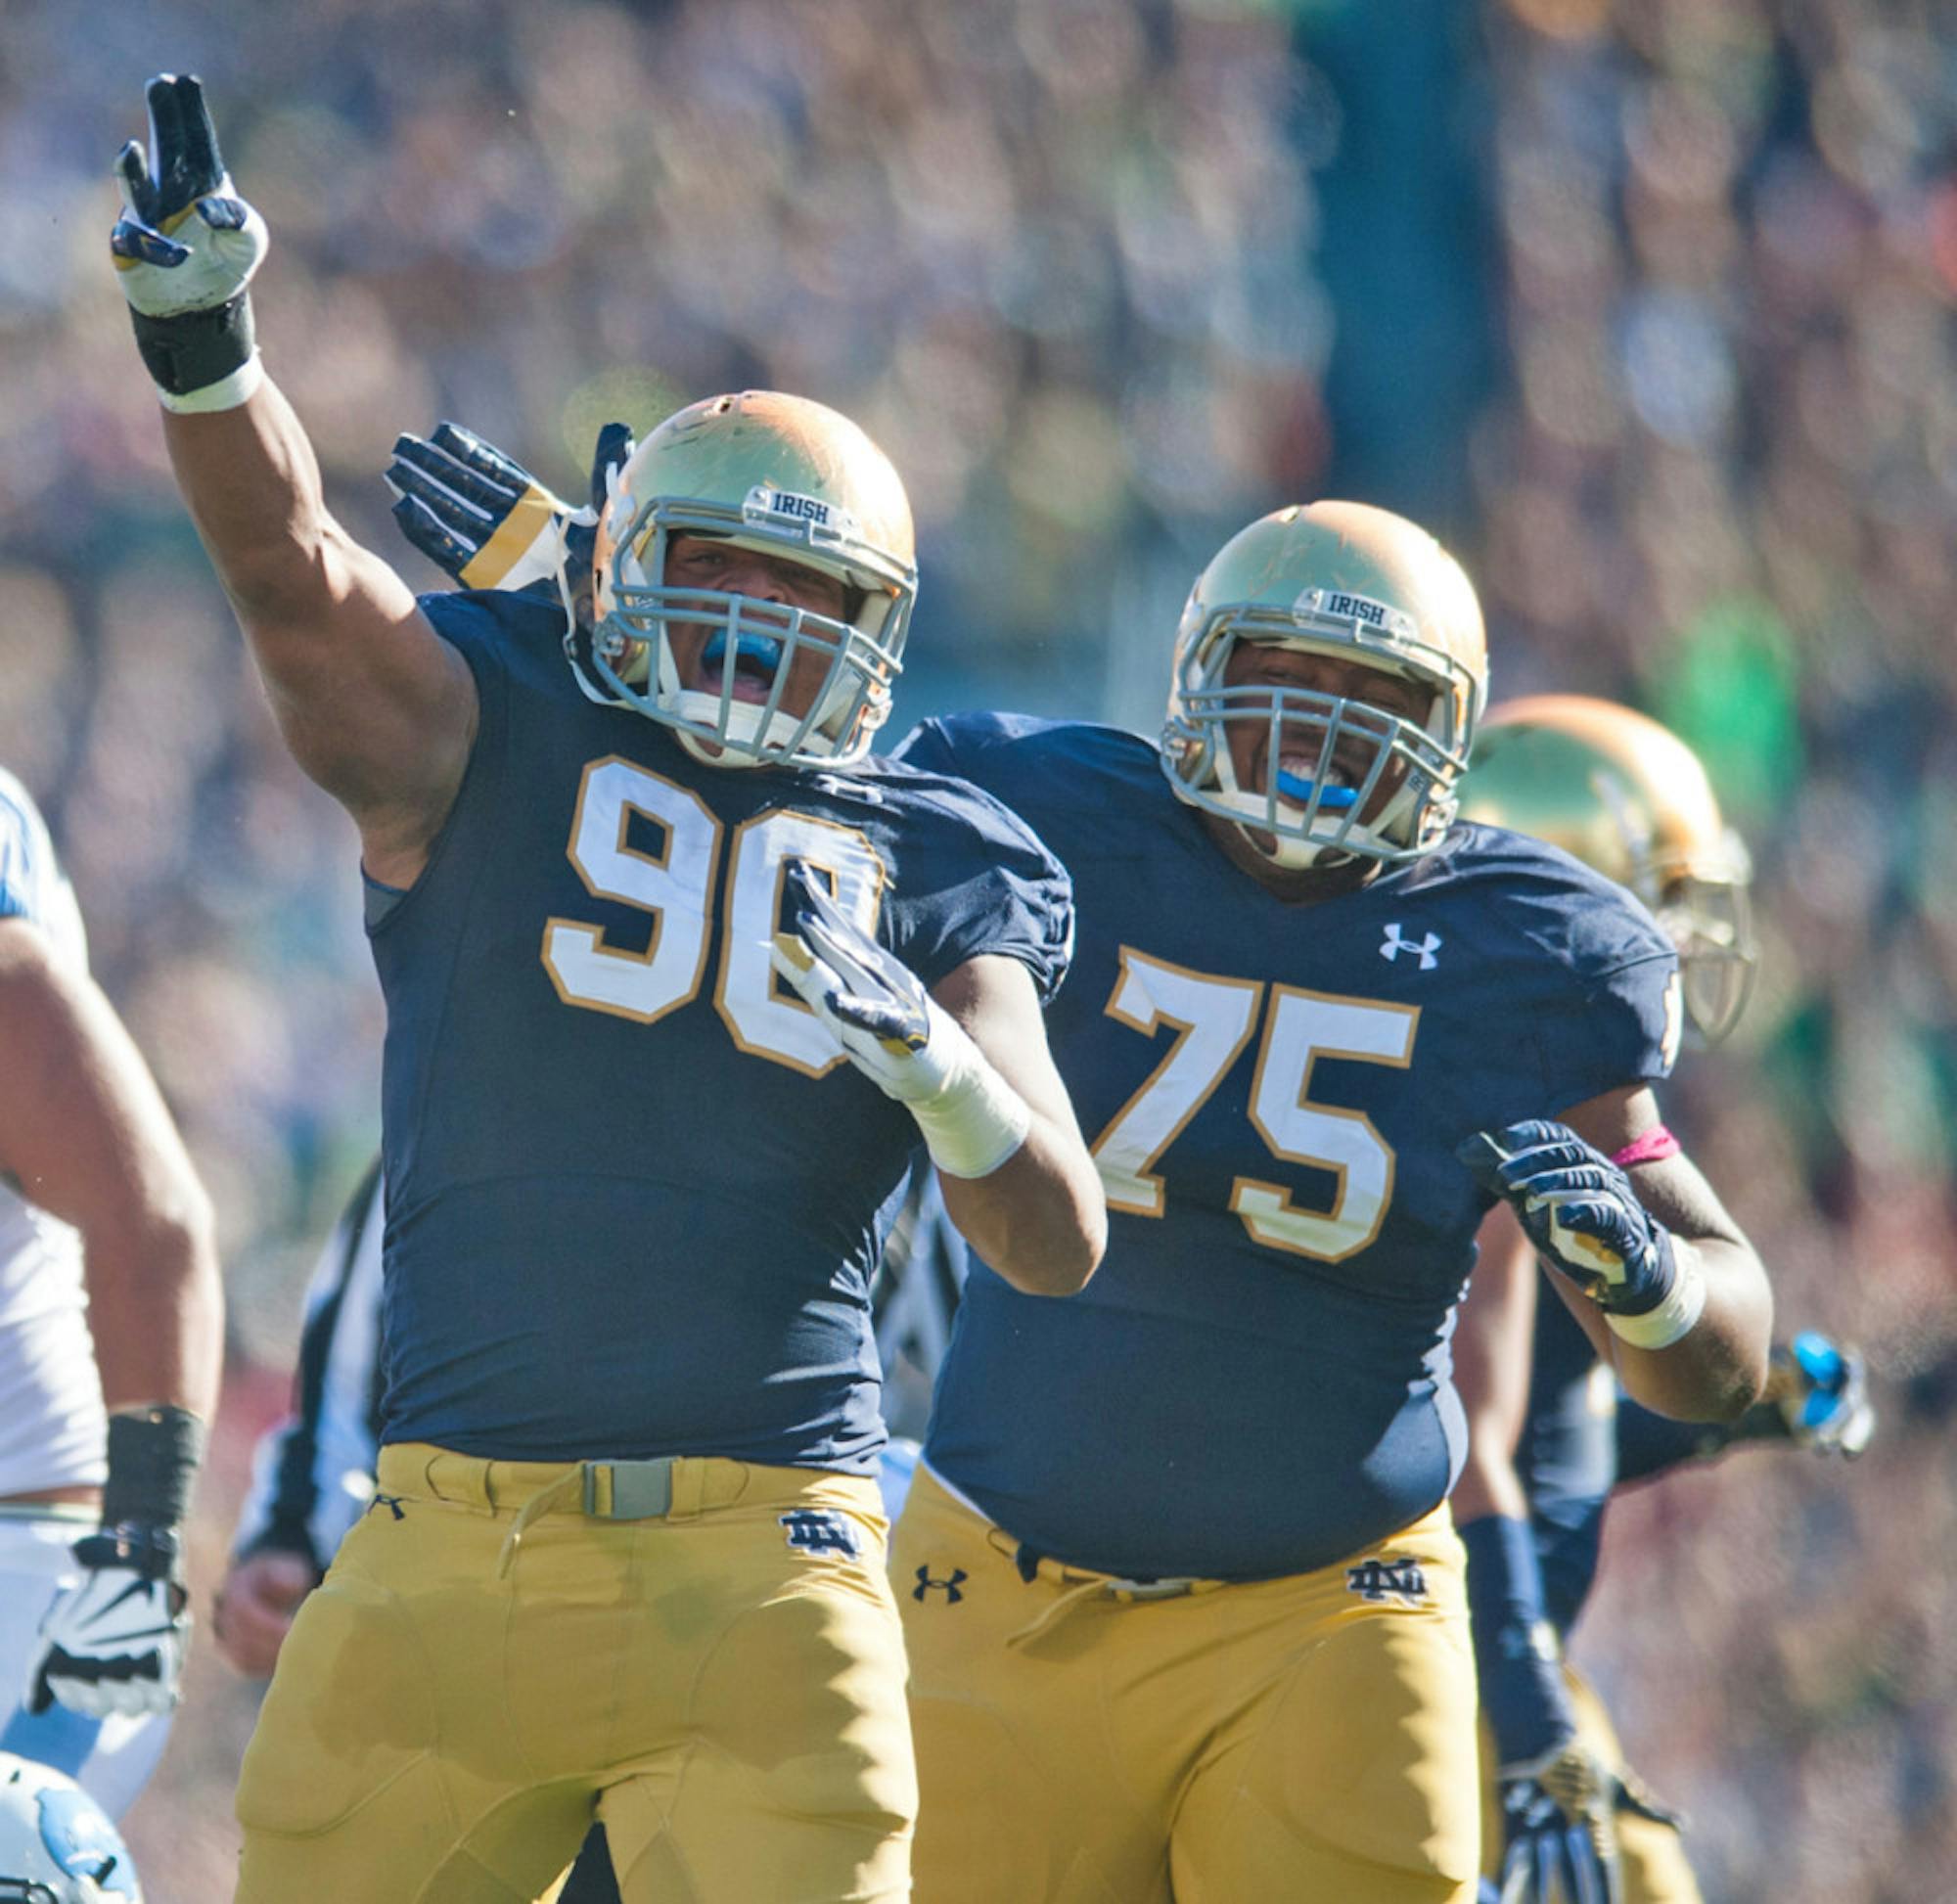 Irish sophomore defensive lineman Isaac Rochell celebrates during Notre Dame’s win Saturday.